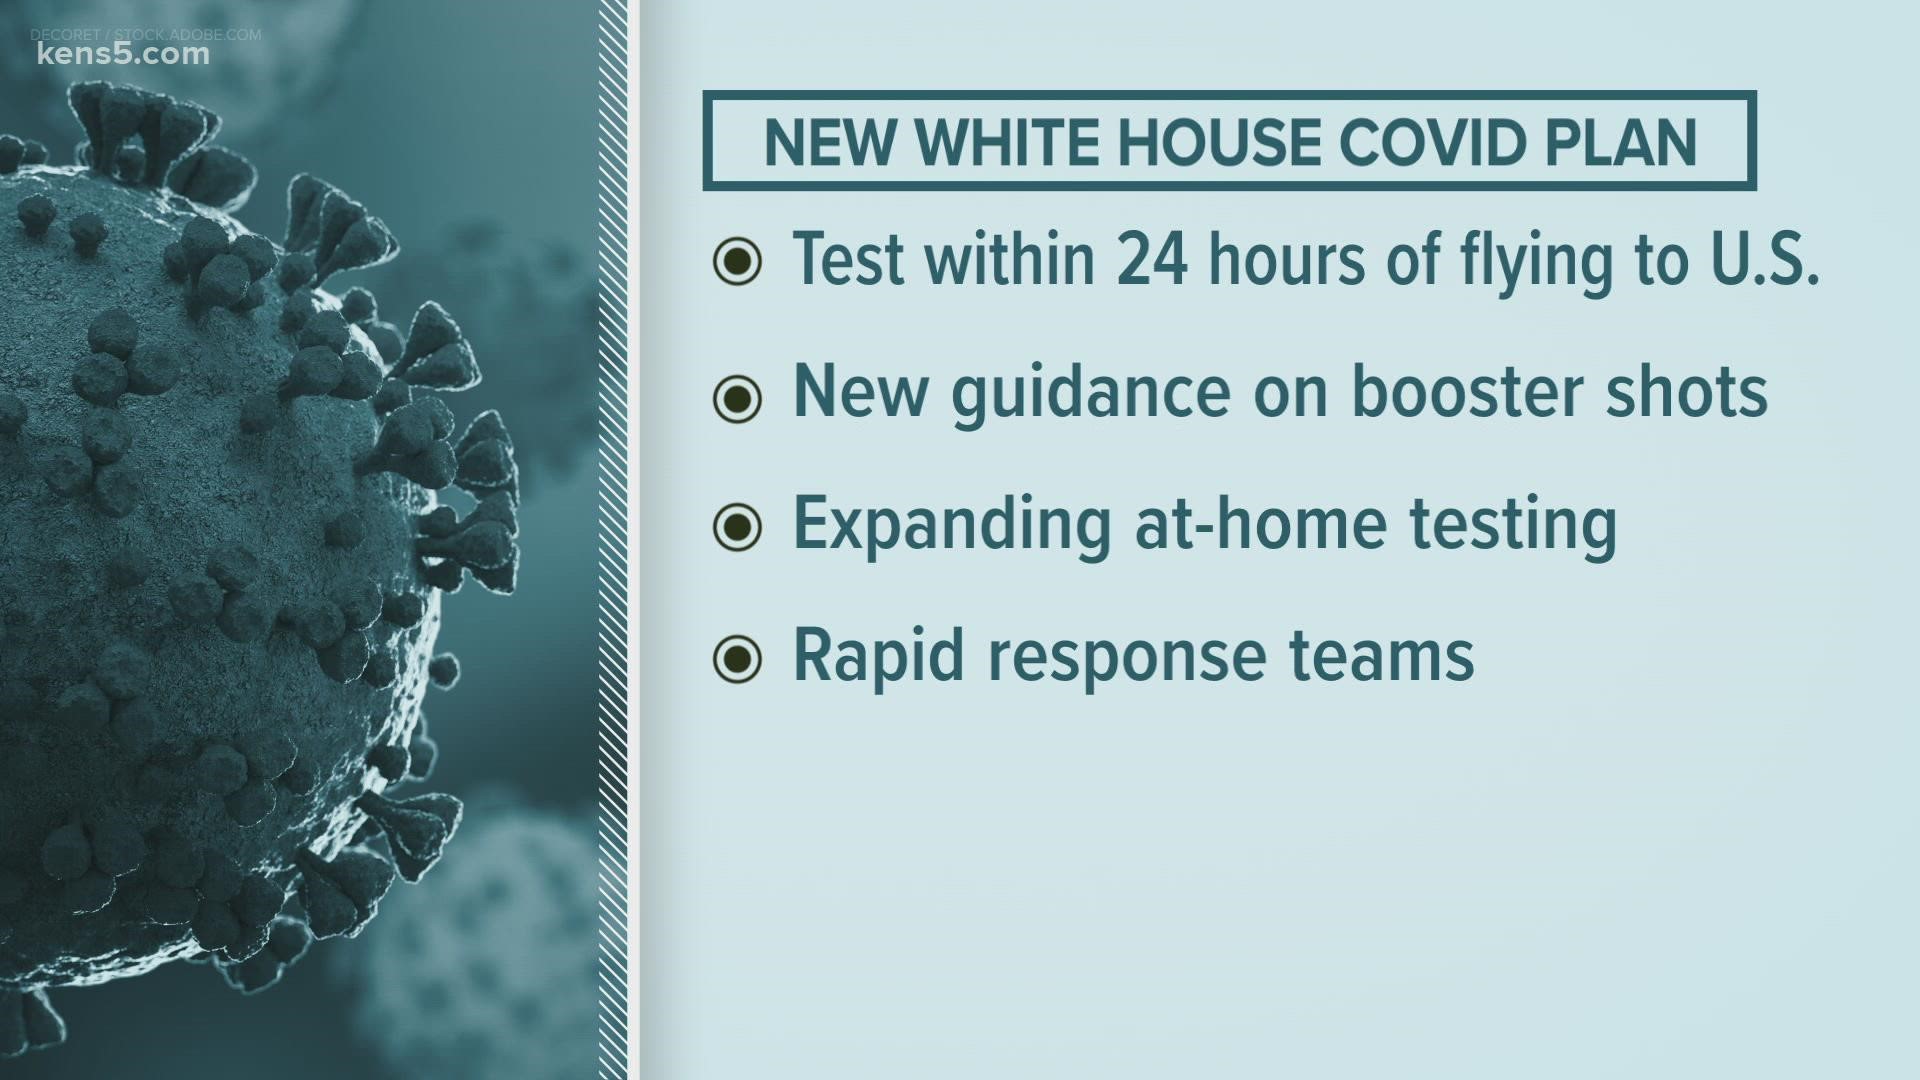 With the omicron variant making it's way around the globe, the White House has extended masking guidelines for those traveling.